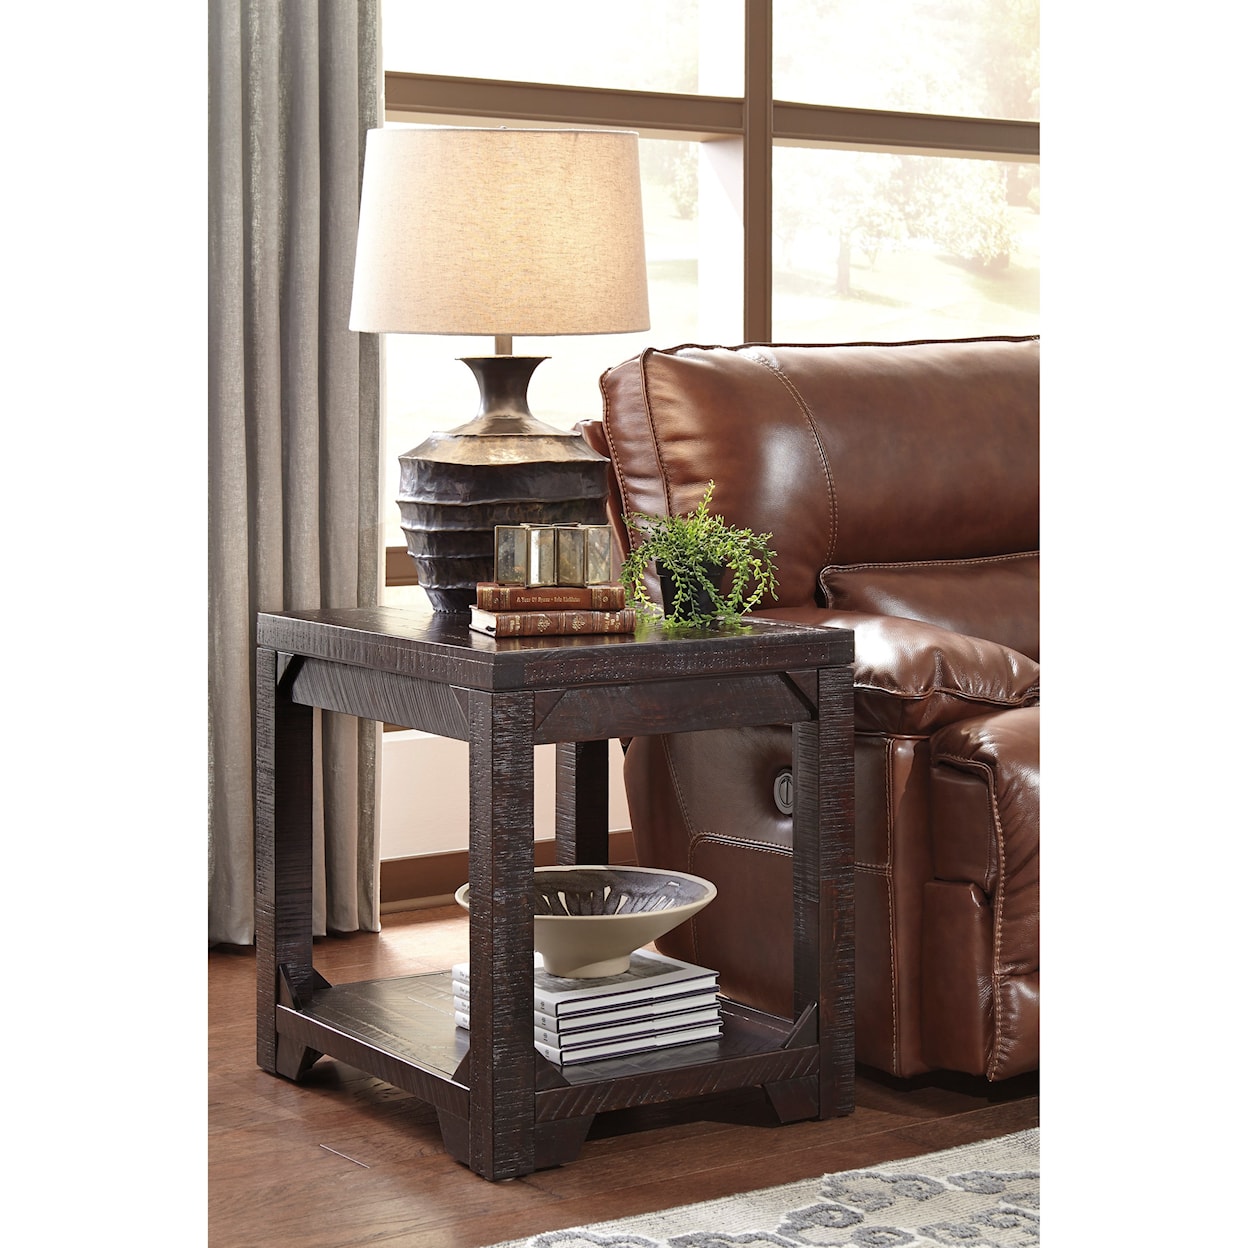 Signature Design by Ashley Rogness Rectangular End Table